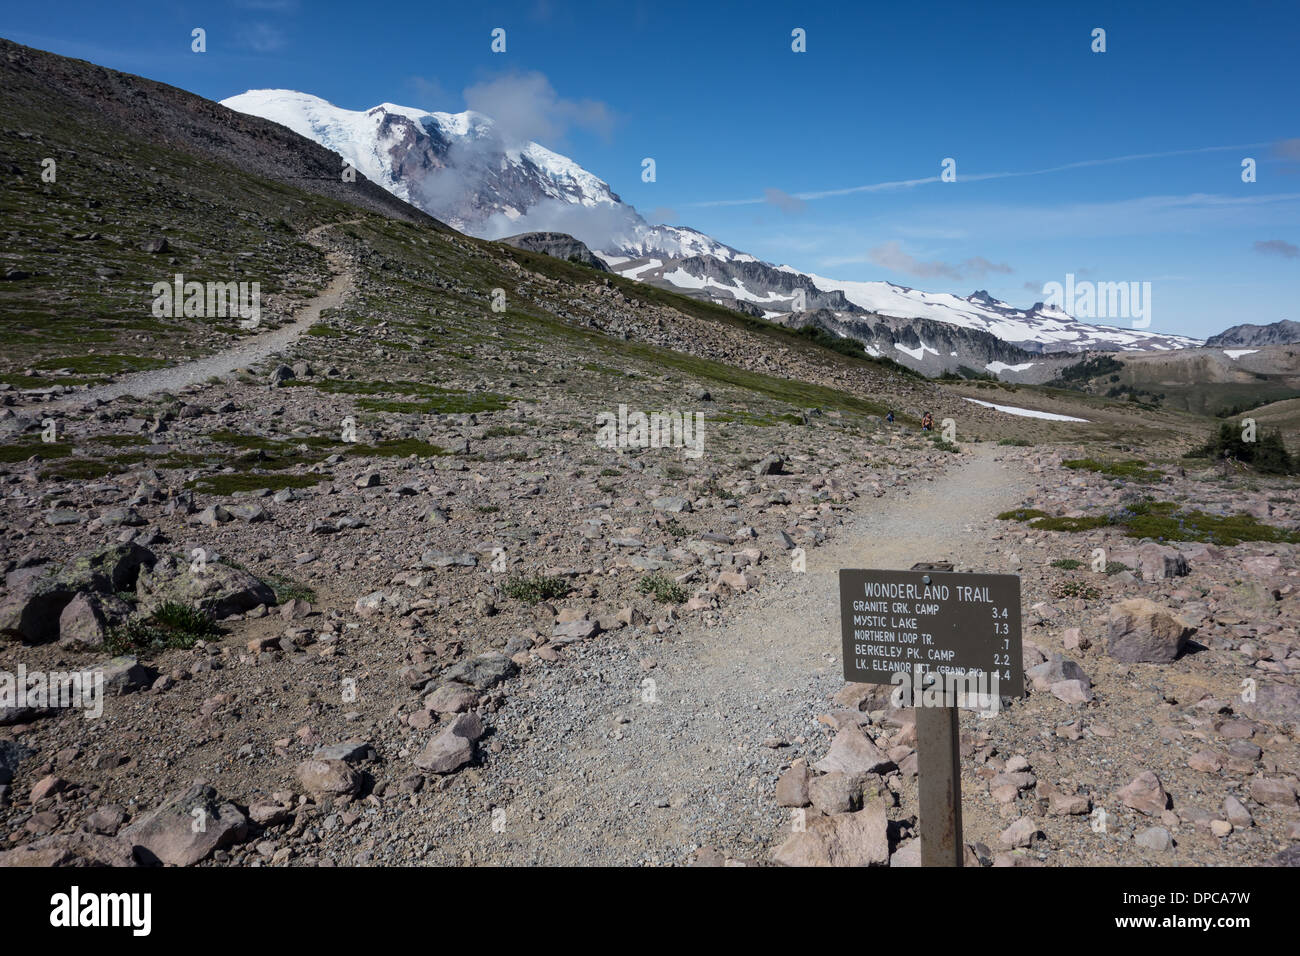 A trail distance marker sign along the Wonderland Trail in Washington State Stock Photo